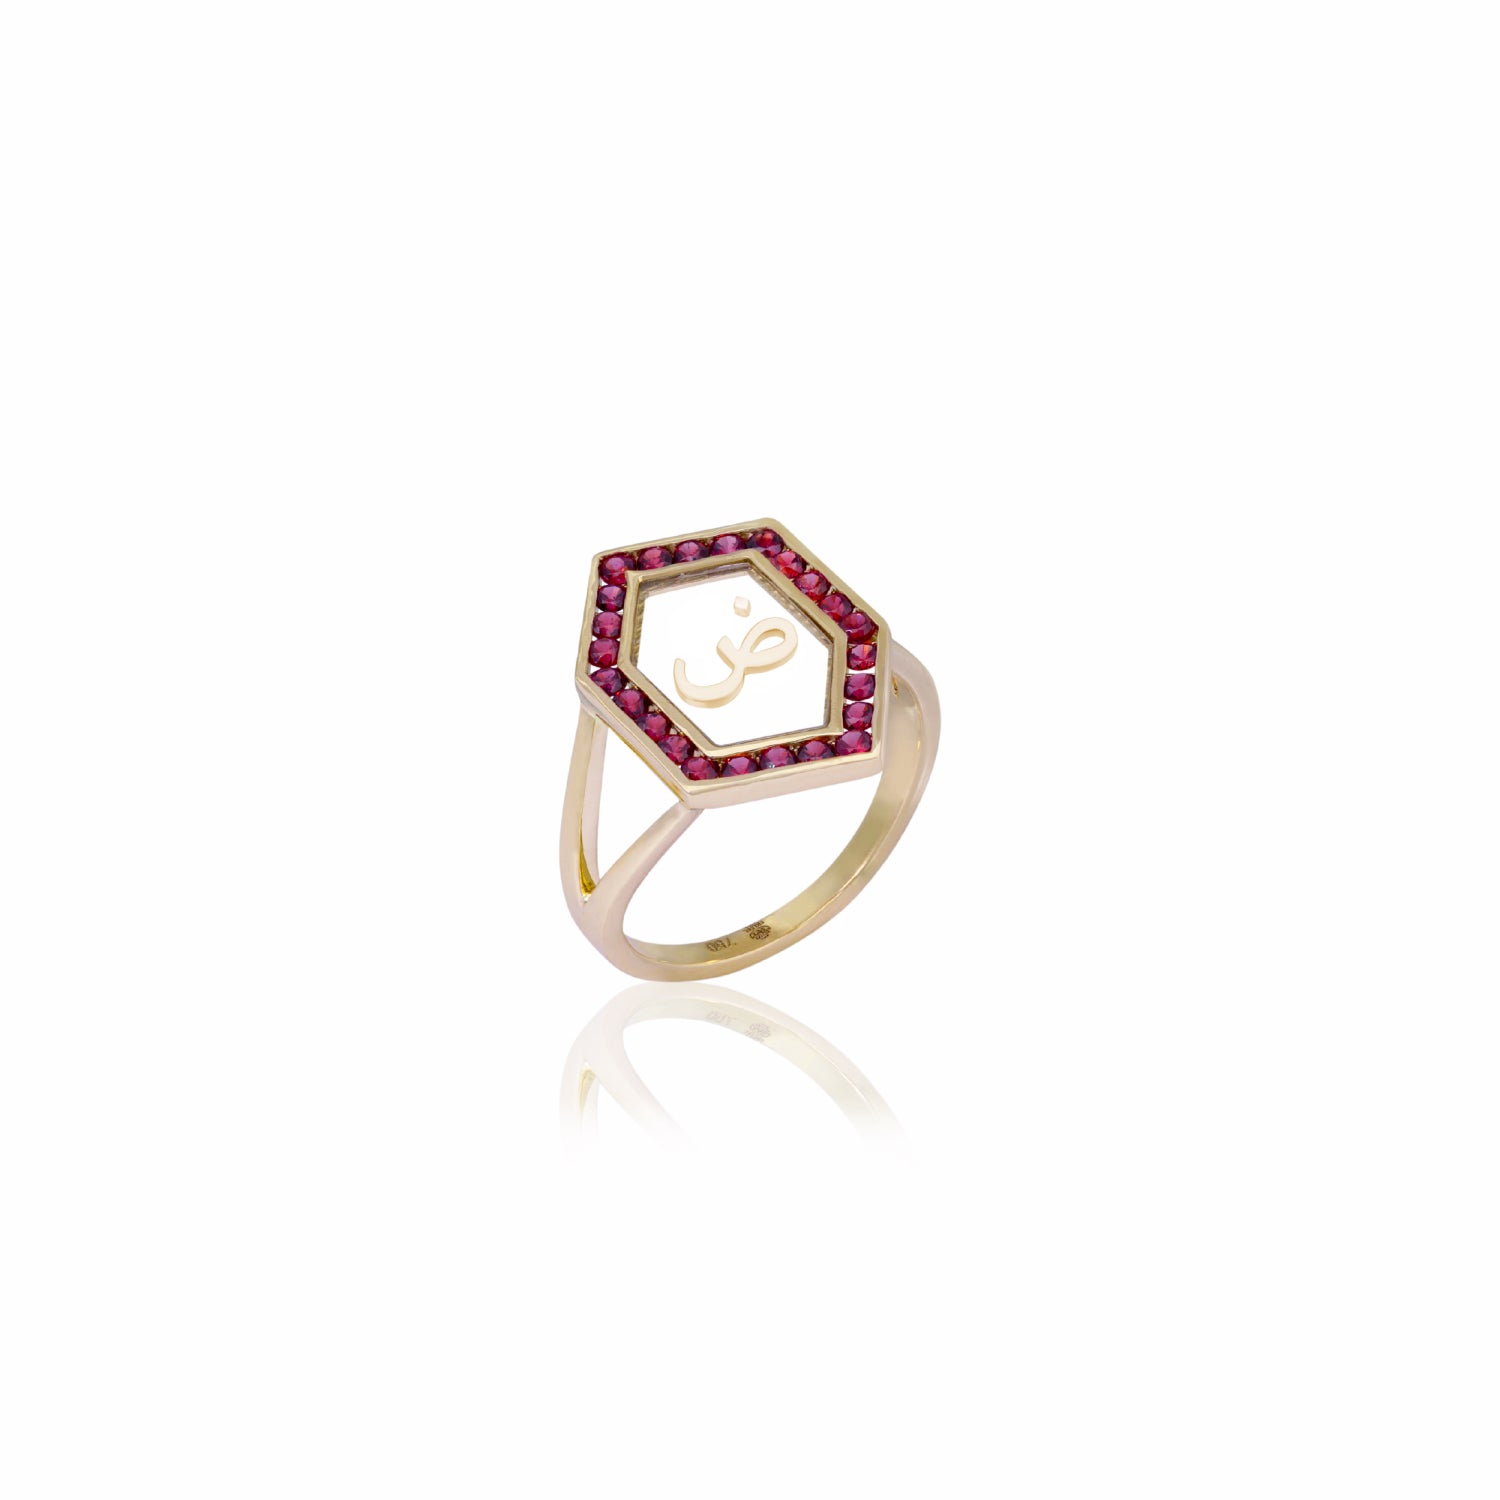 Qamoos 1.0 Letter ض Ruby Ring in Yellow Gold